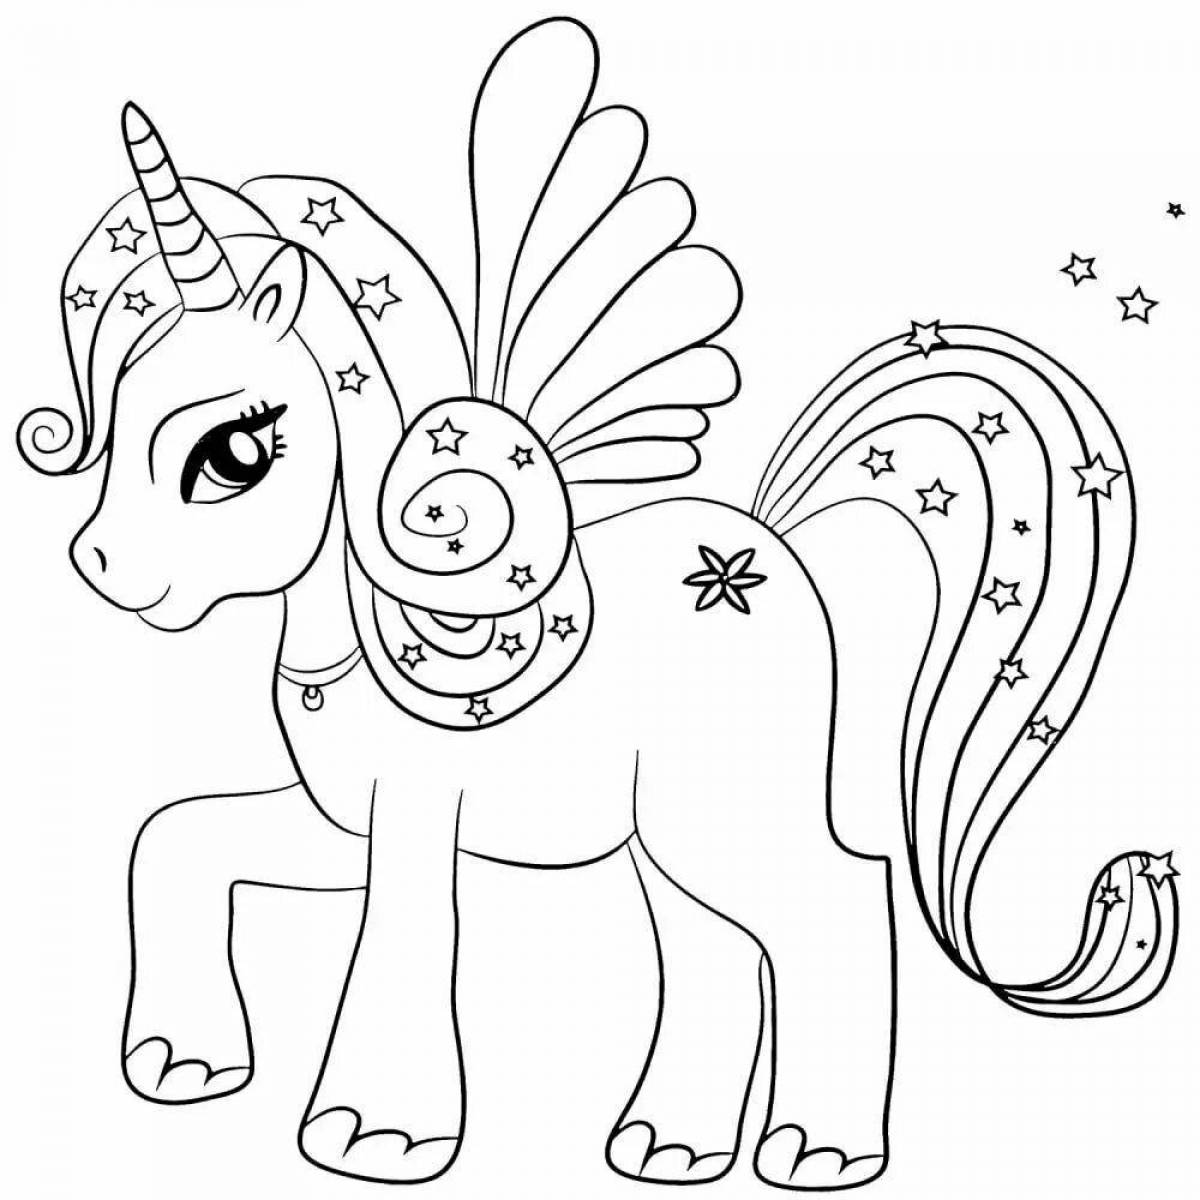 Sparkling coloring book for girls 7 years old unicorn